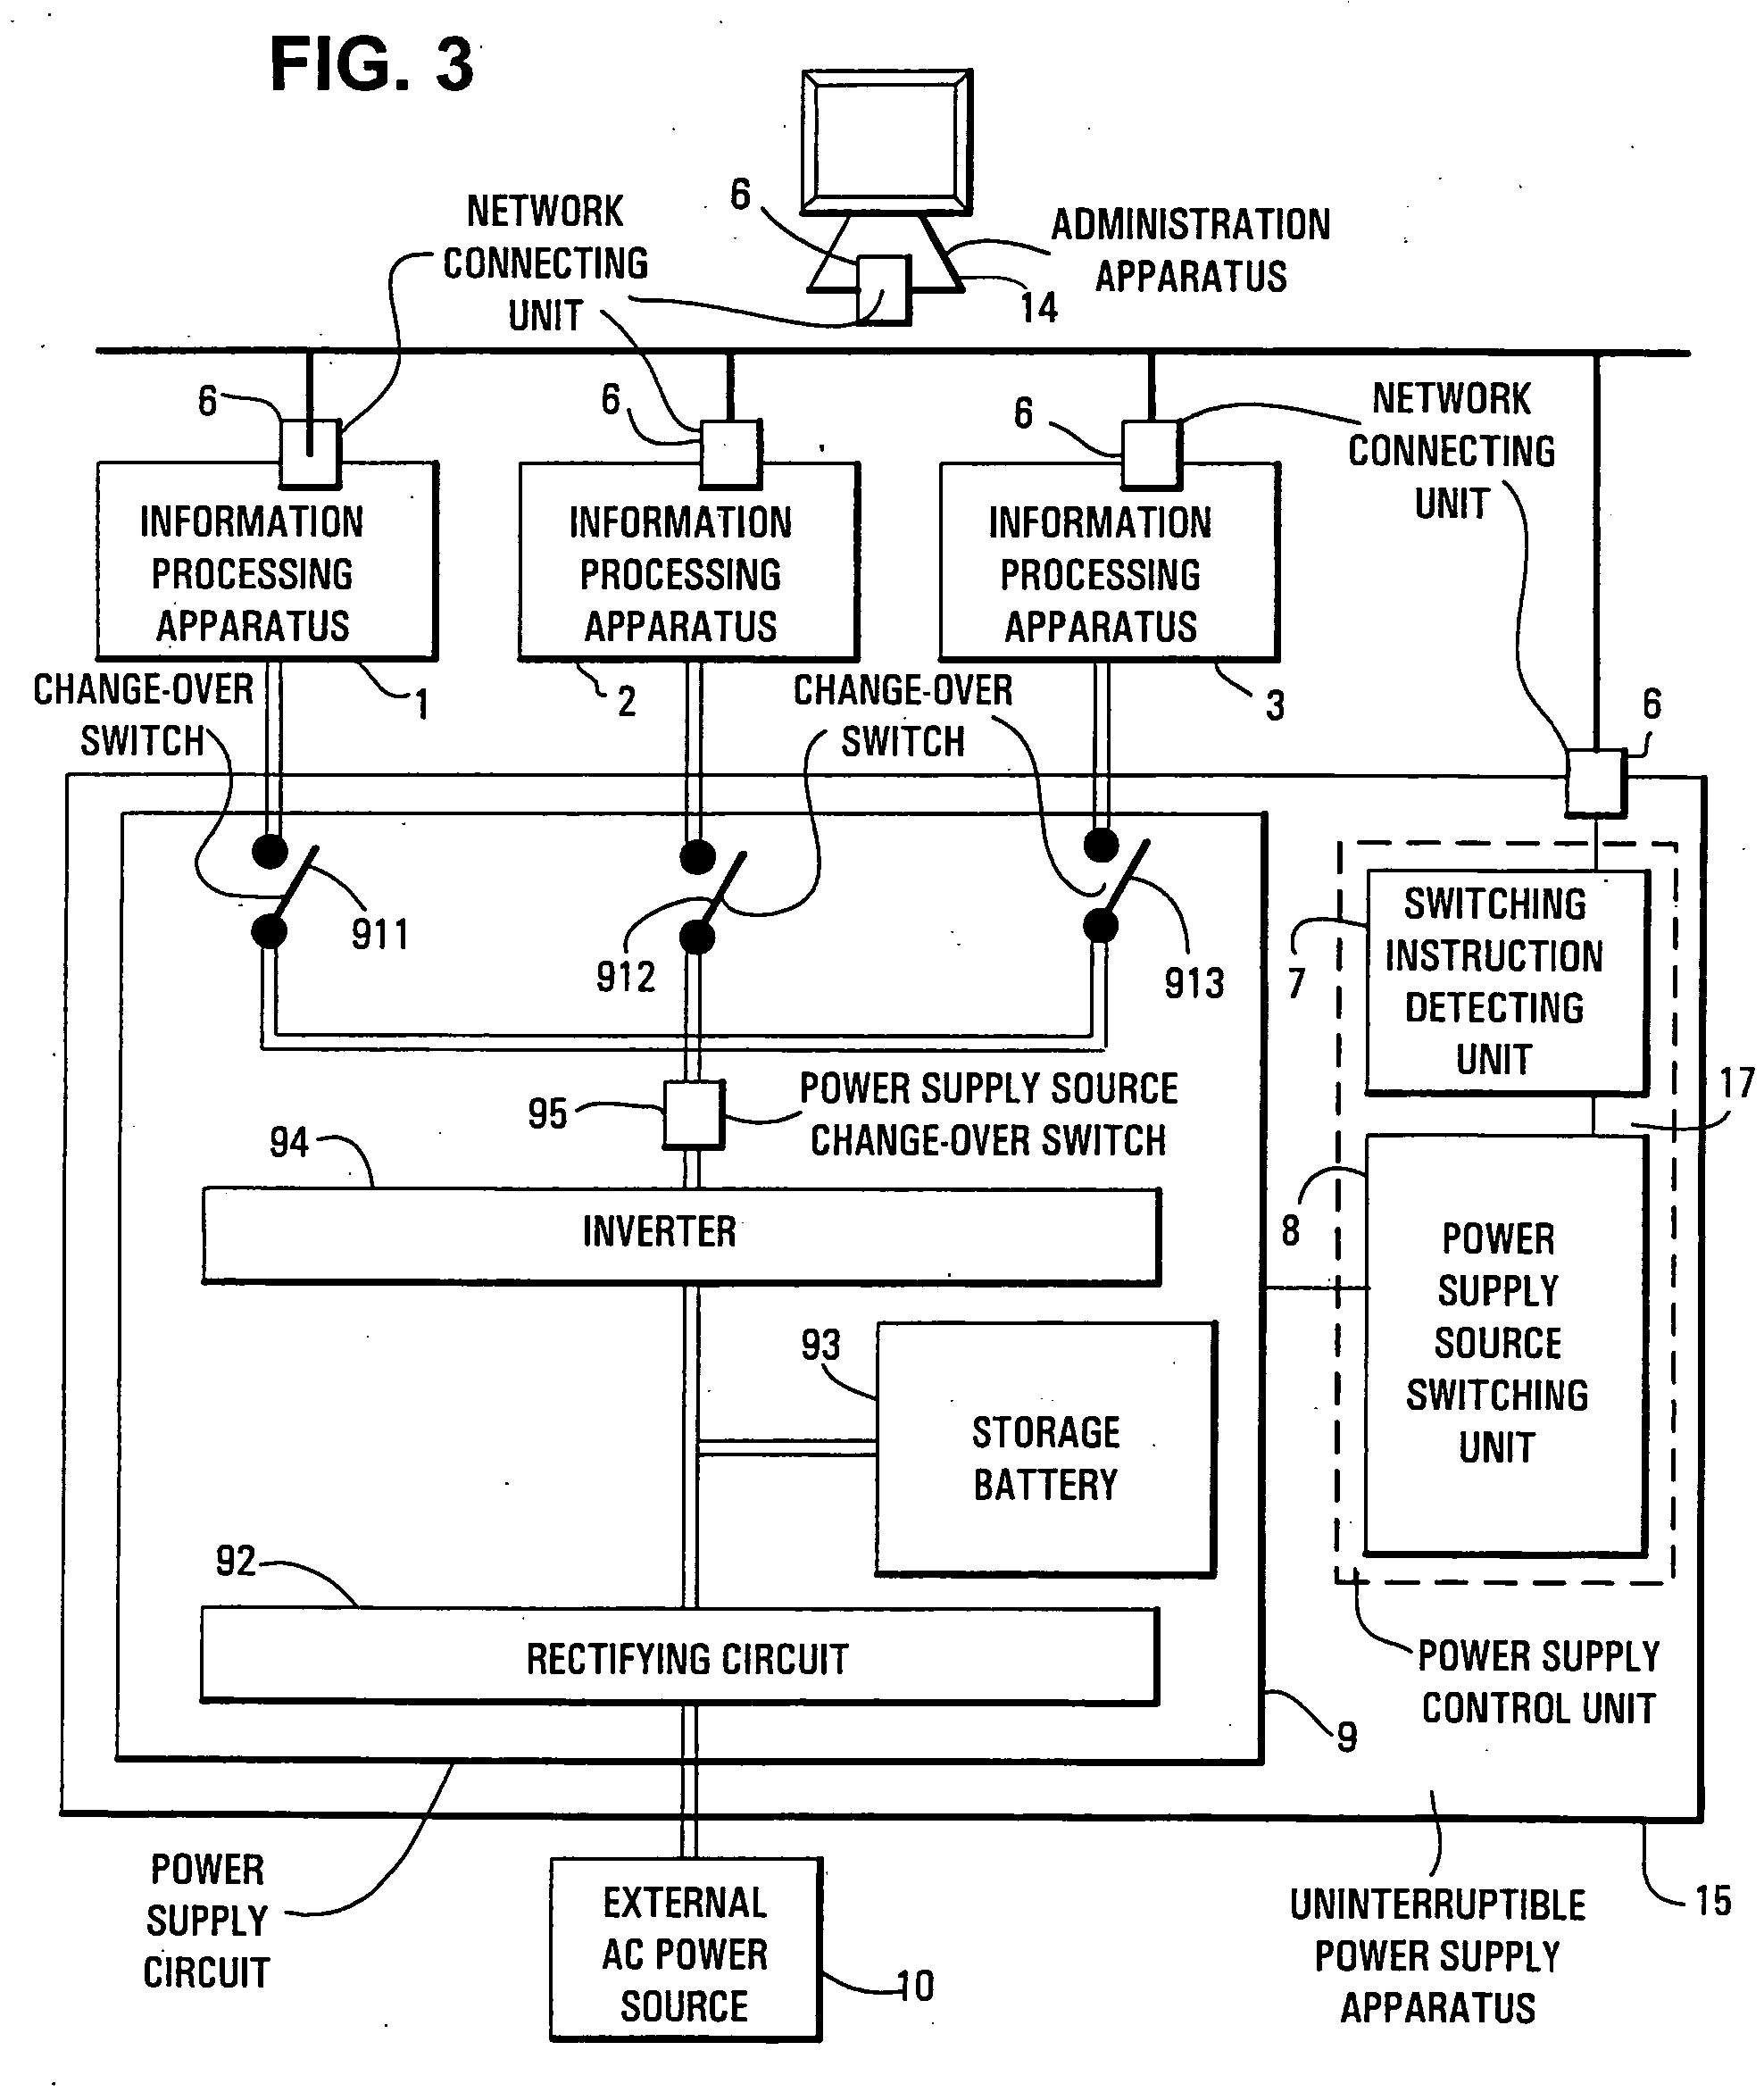 Power supply control apparatus, power supply control system, and administration apparatus